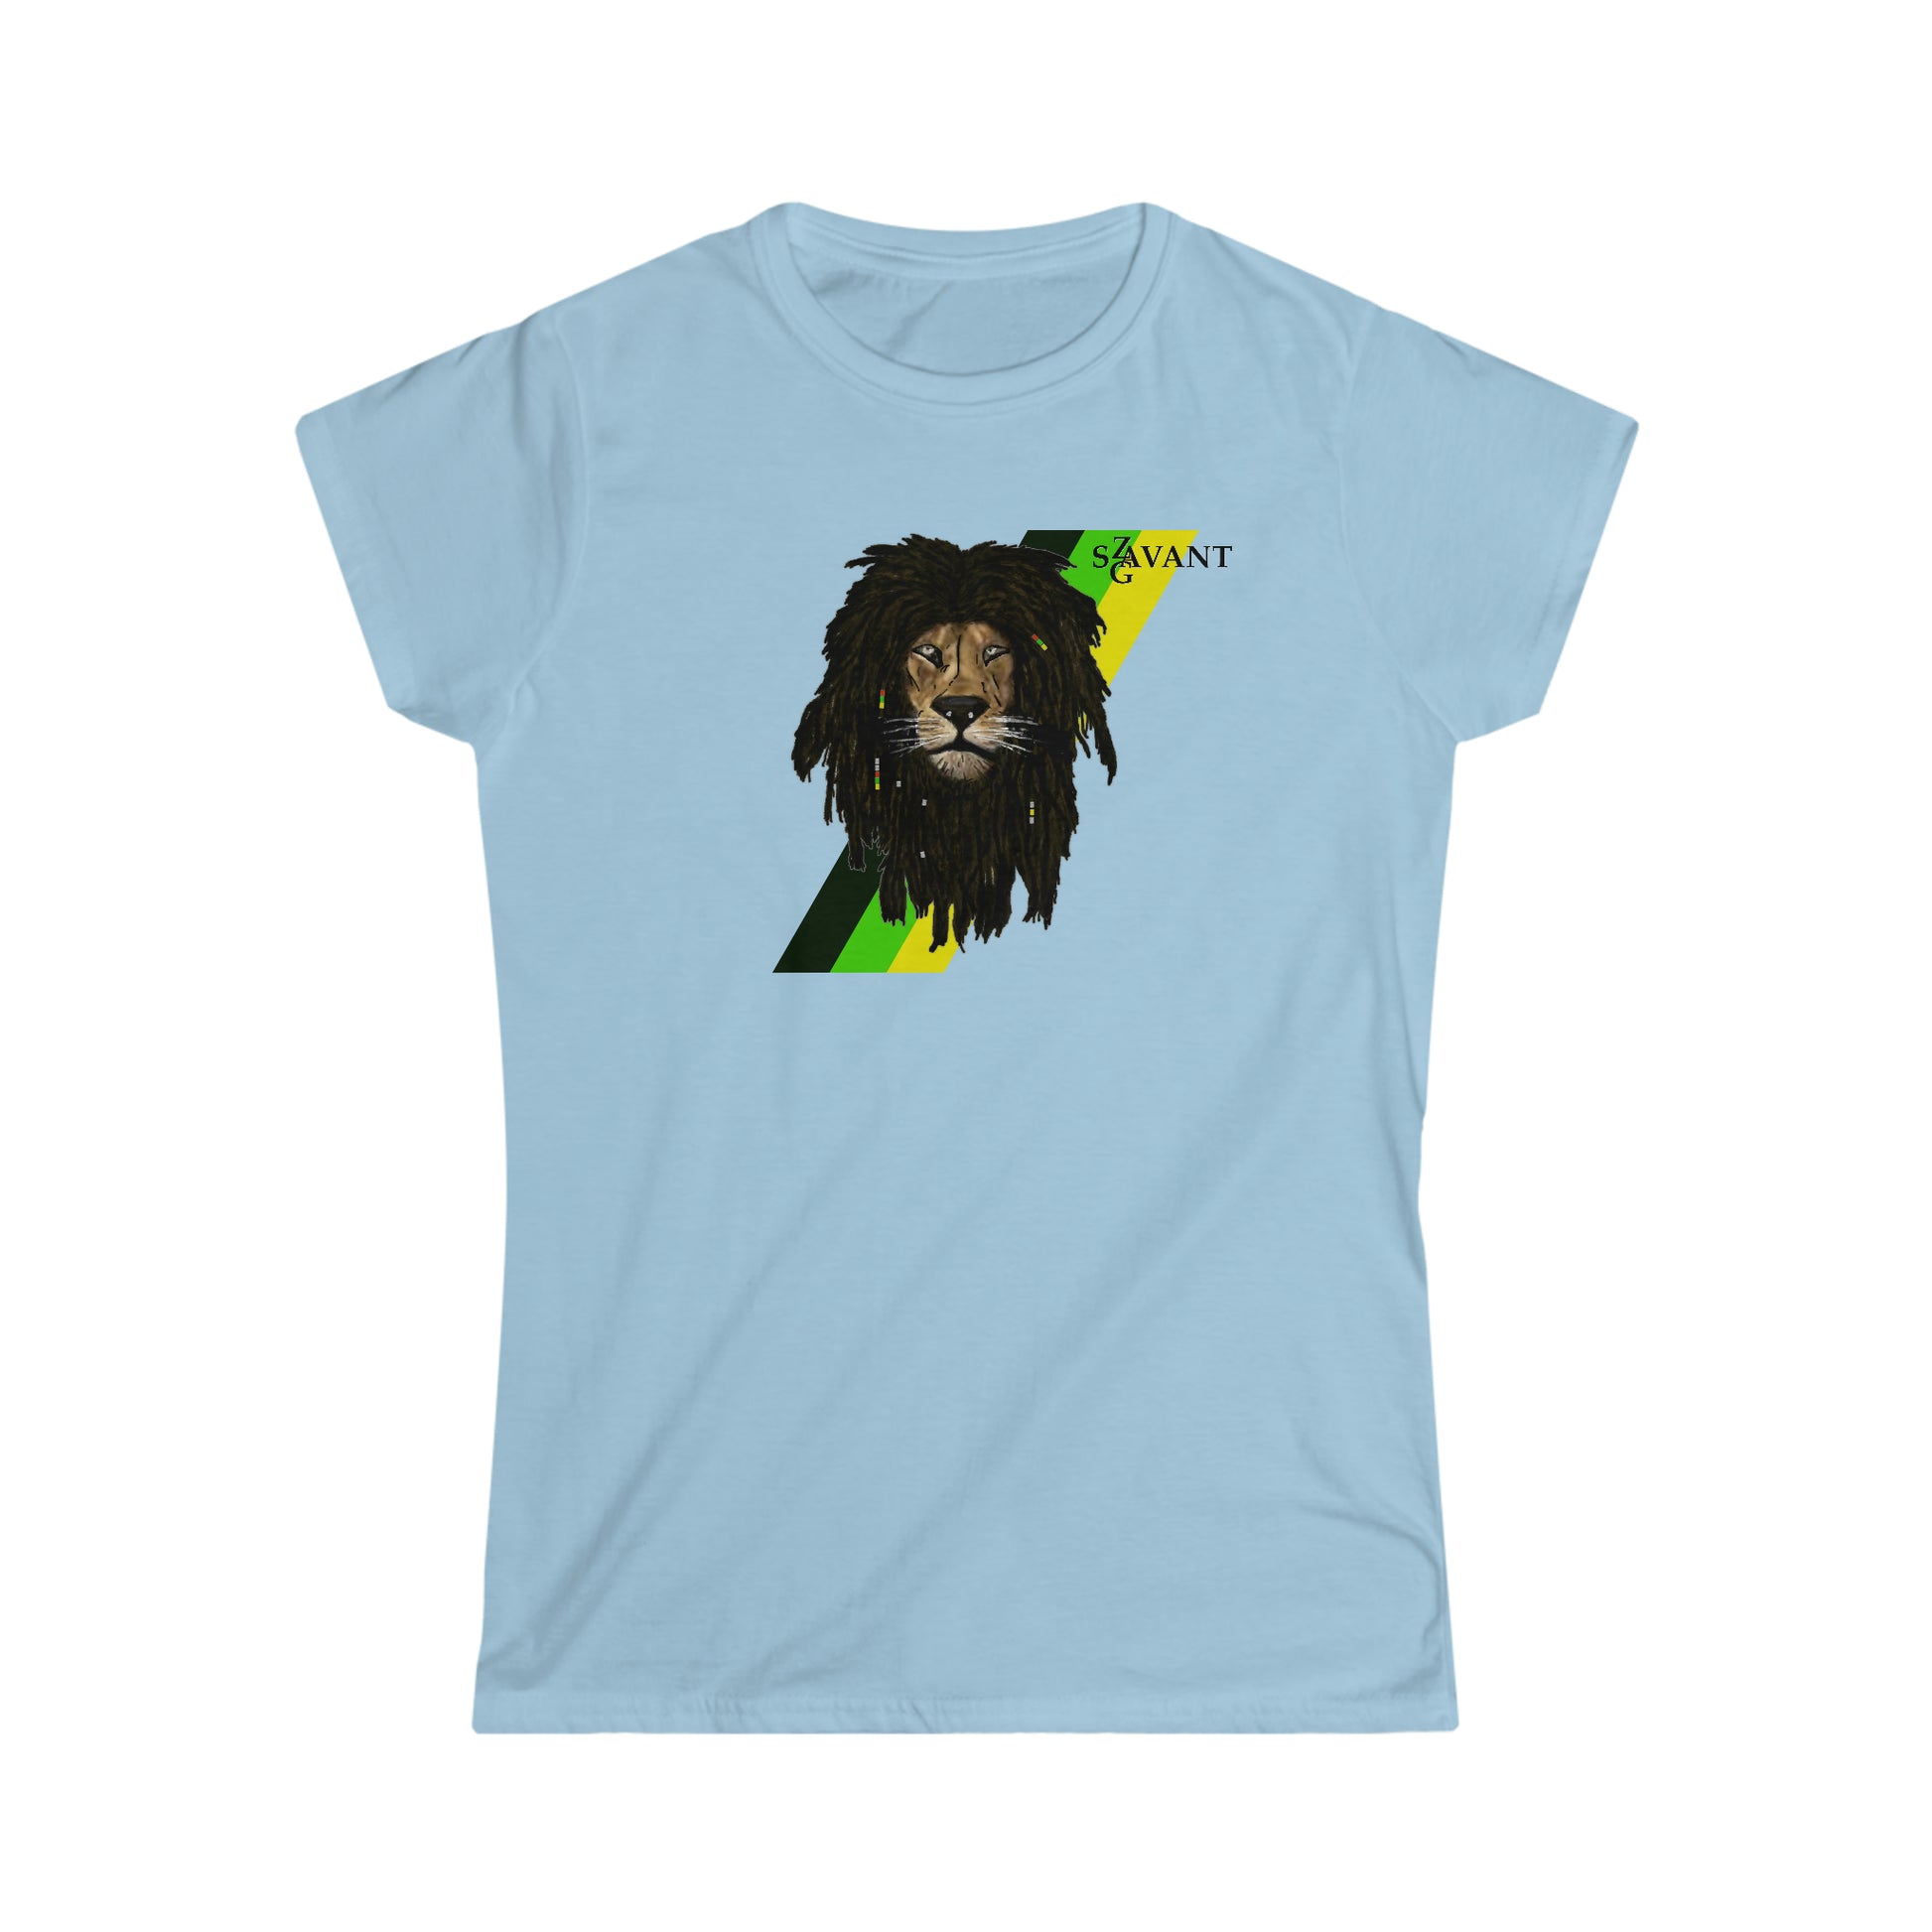 Women's Softstyle T-Shirt - With Jamaican Colors